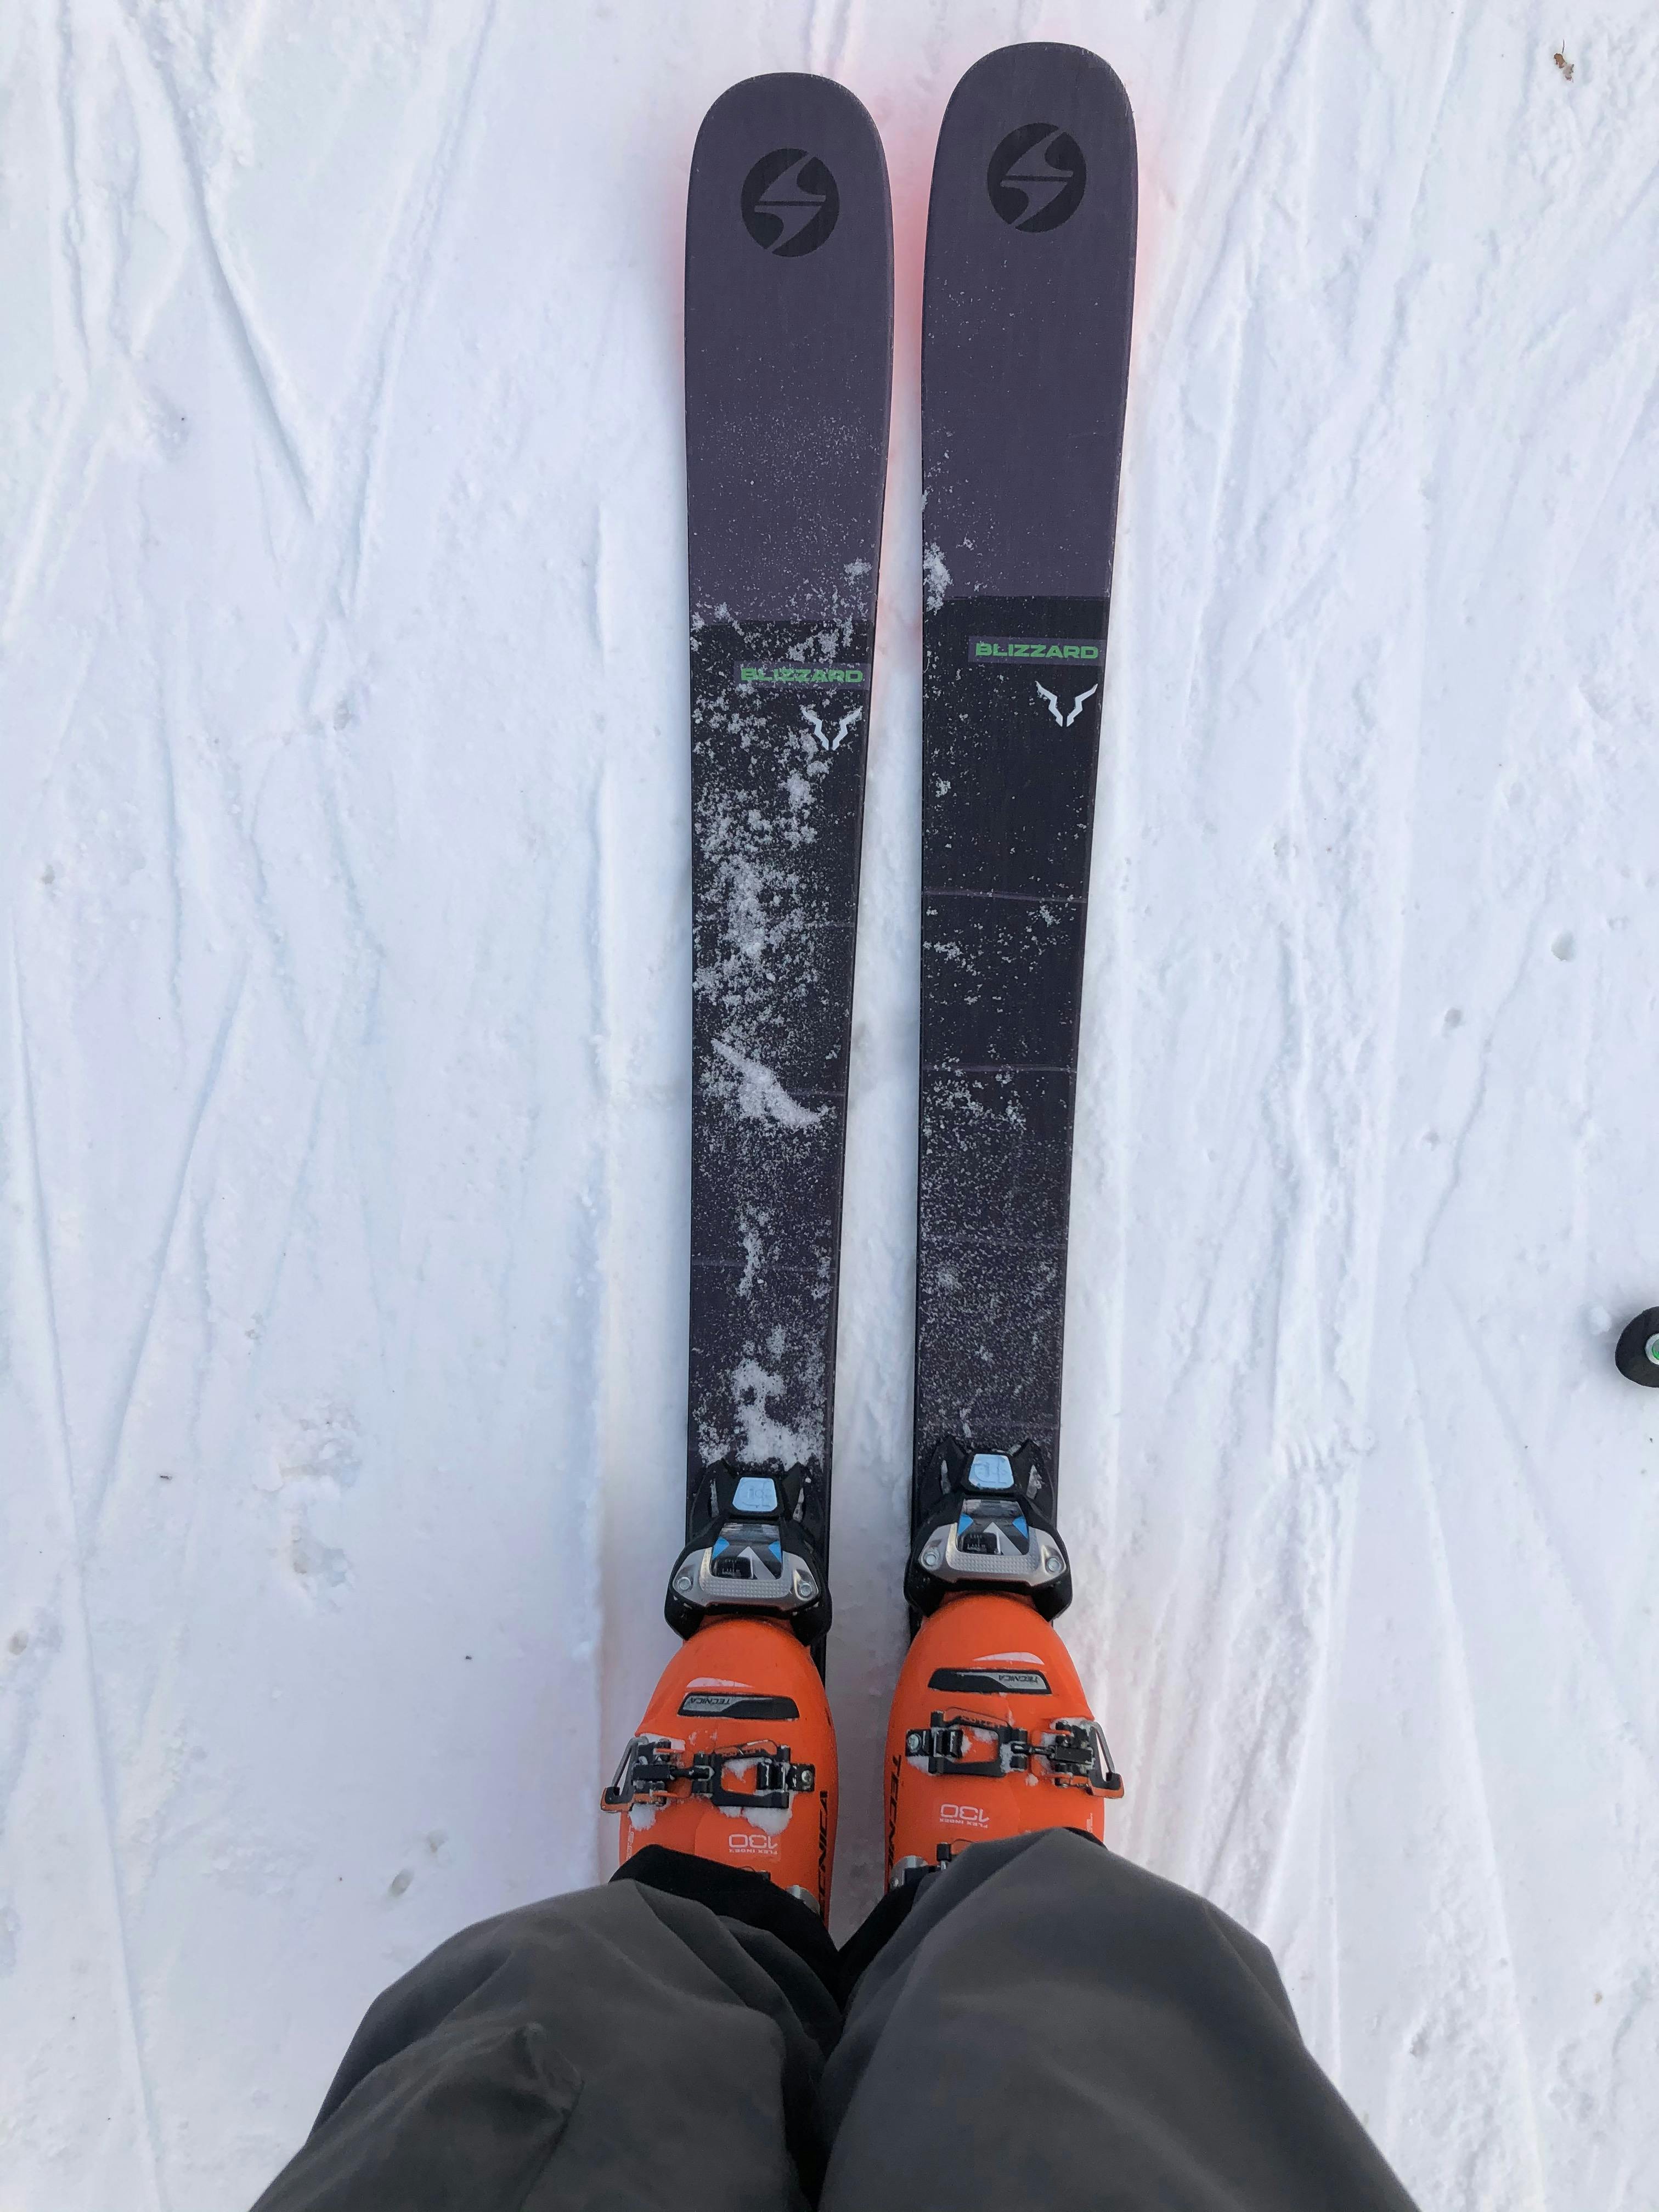 Top down view of the Blizzard Brahma Skis on snow. 